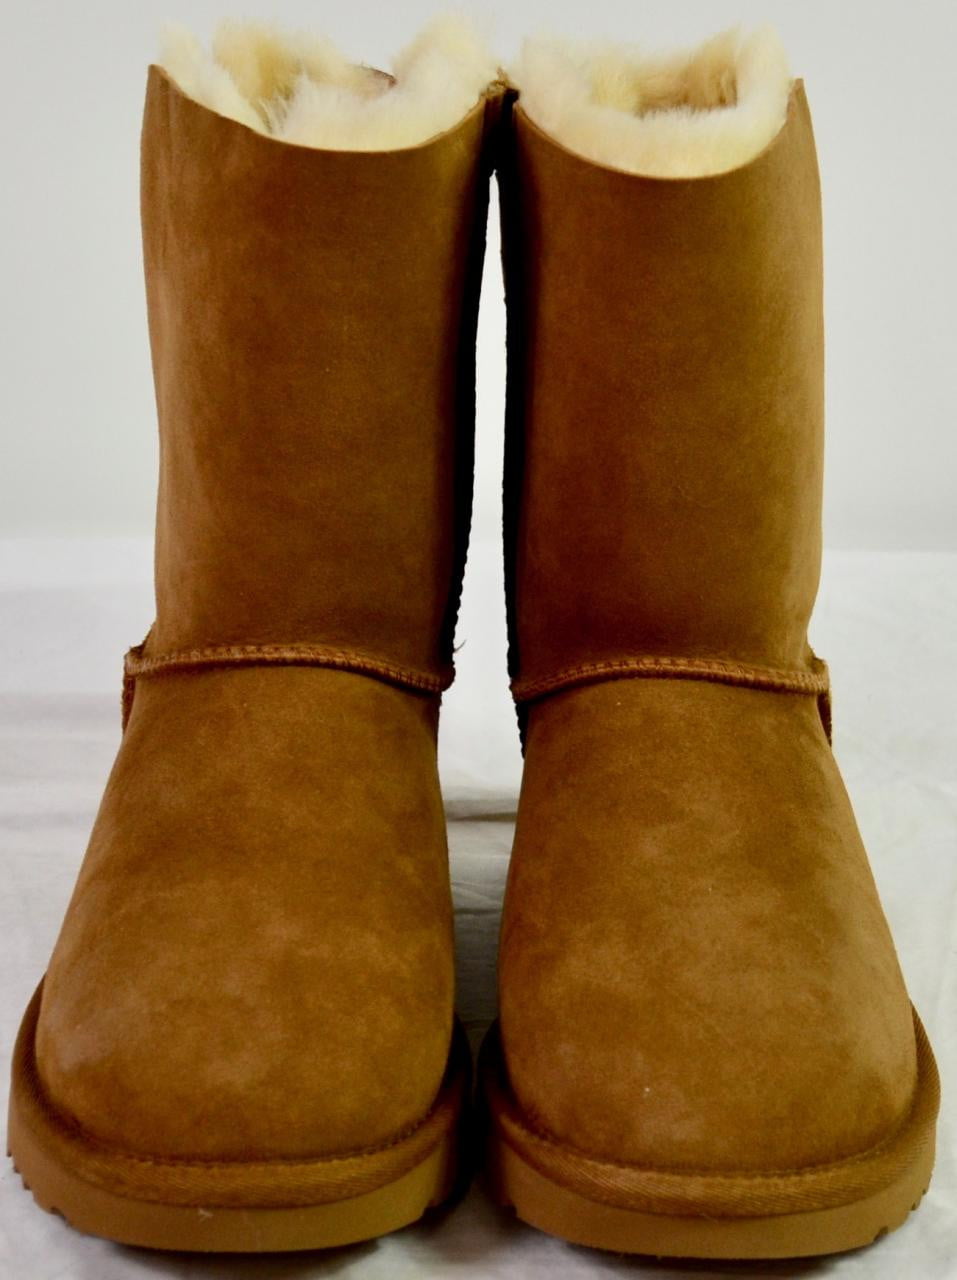 ugg women's boots size 8